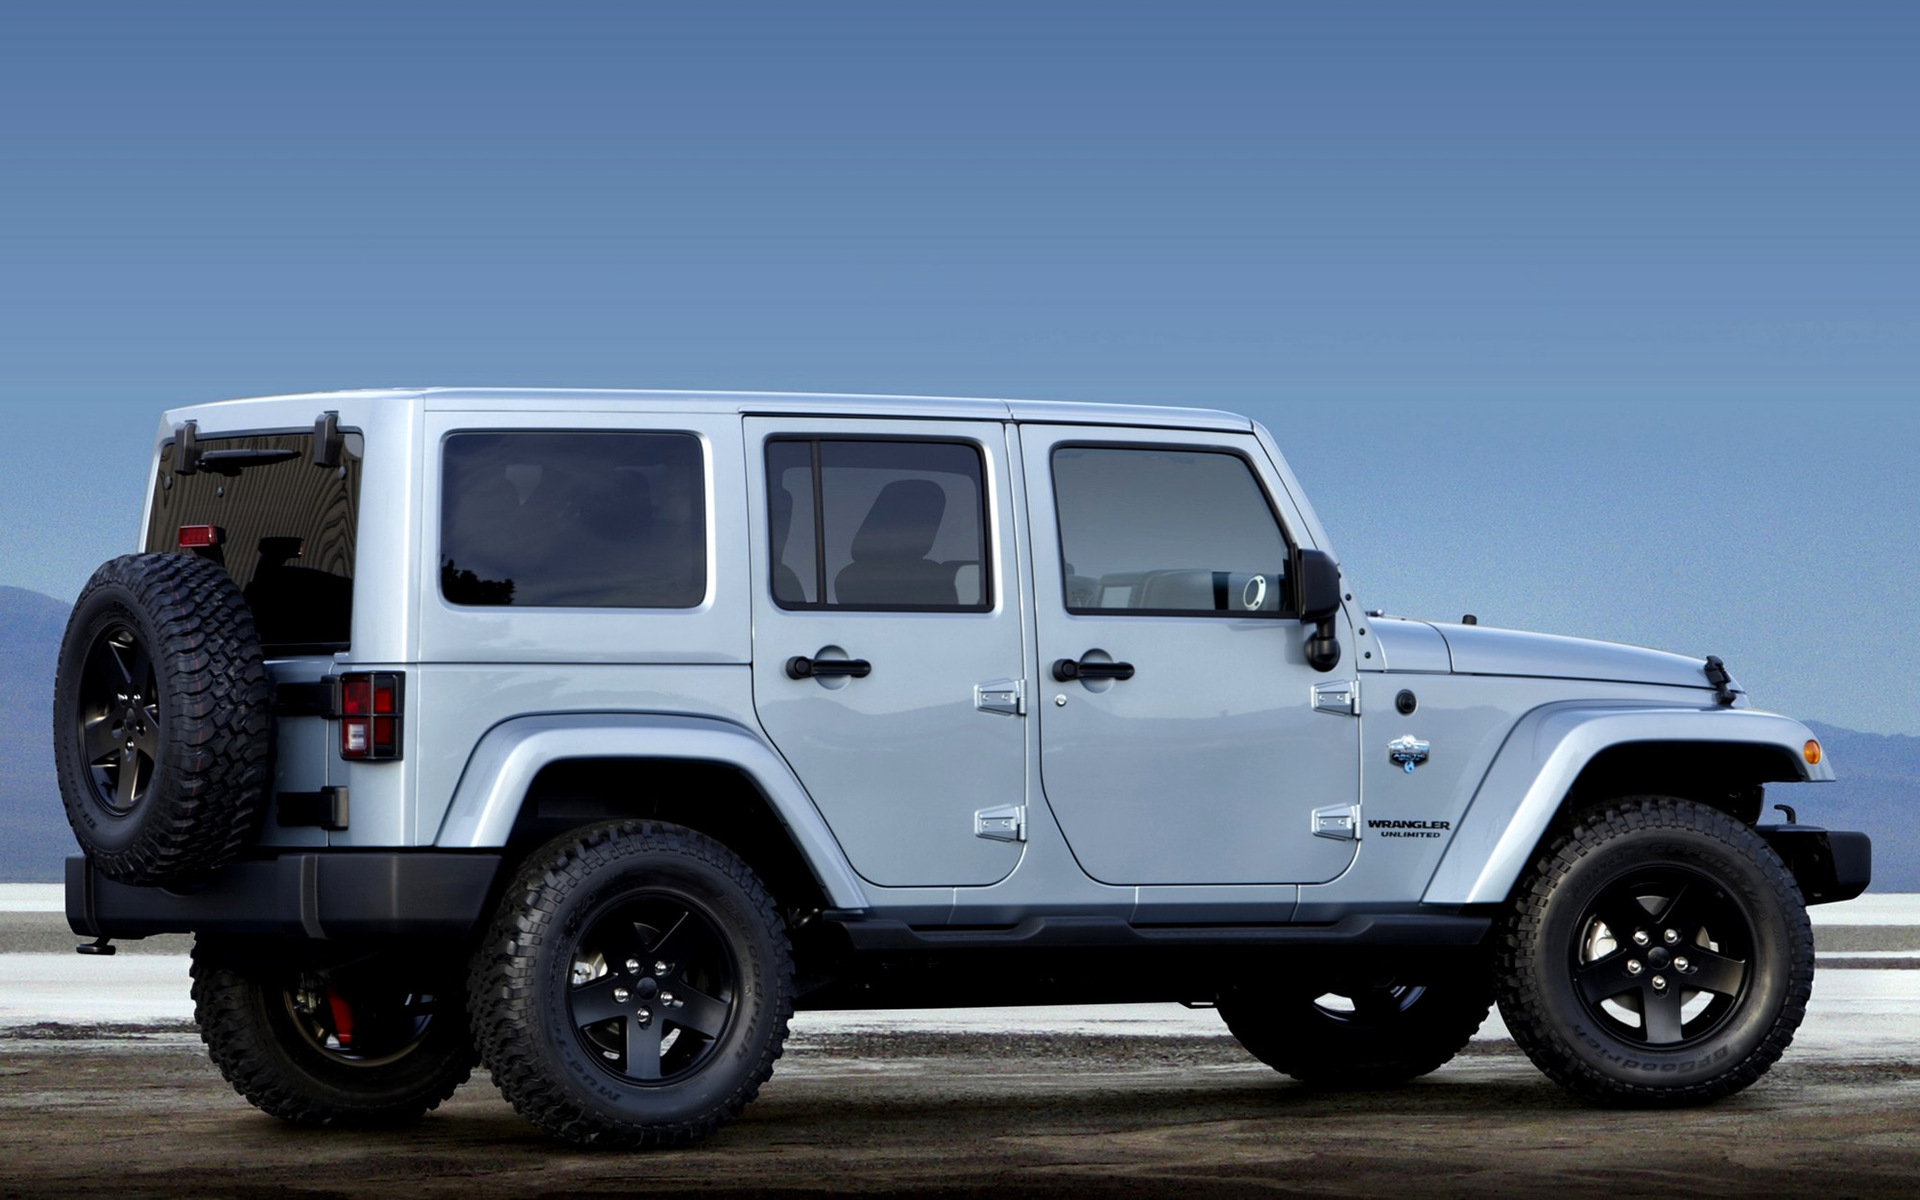 Jeep Wrangler Unlimited Arctic Wallpapers